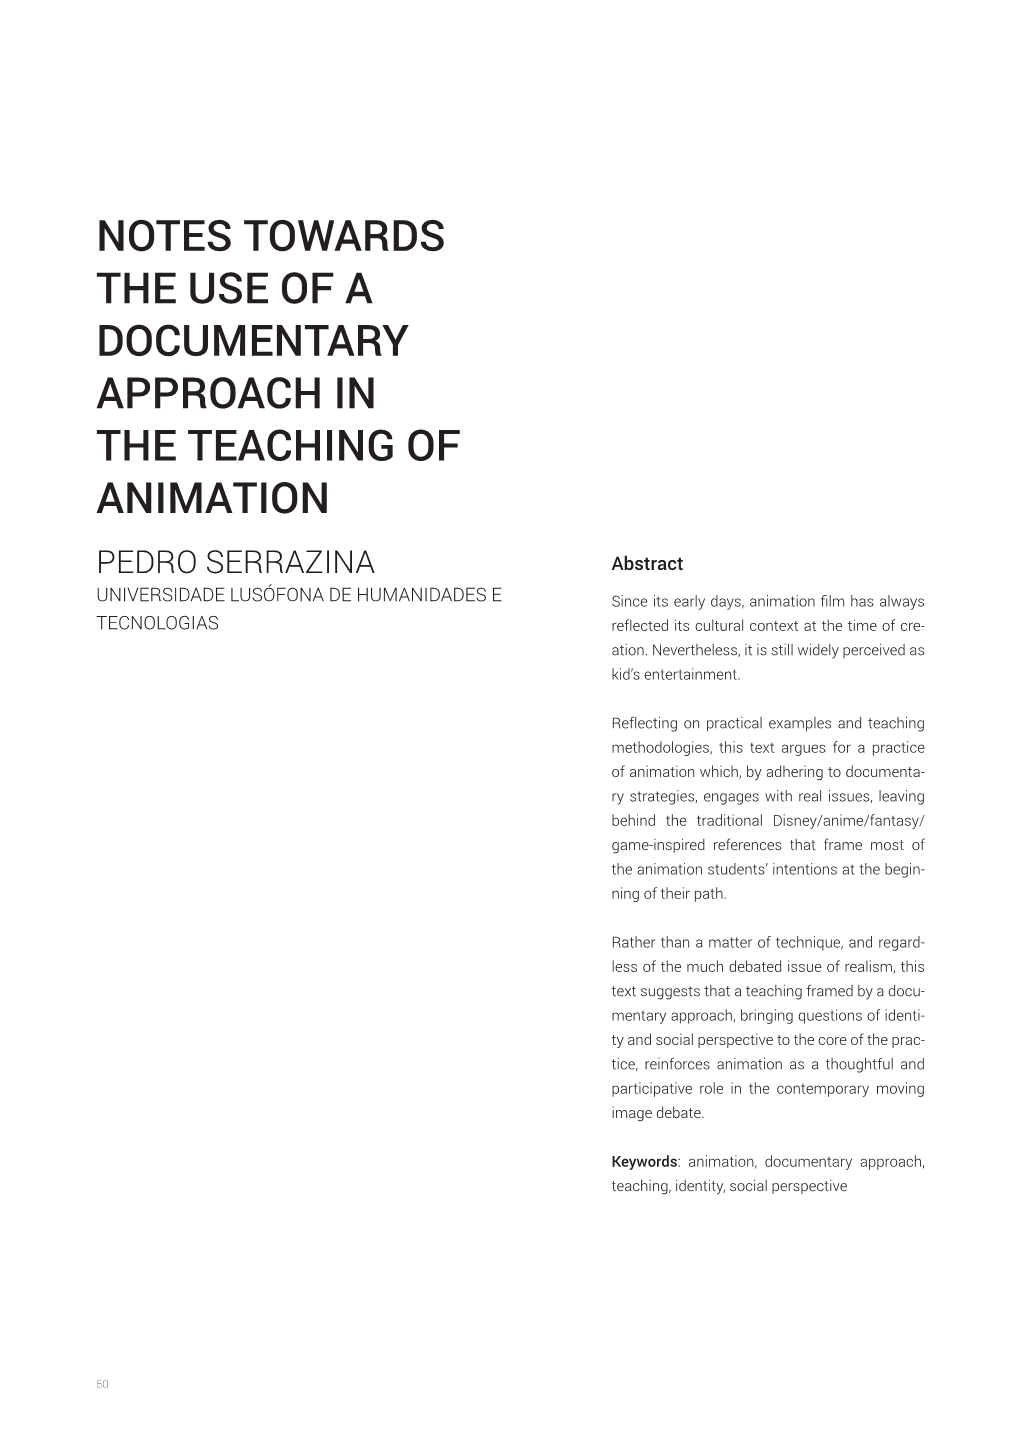 Notes Towards the Use of a Documentary Approach in the Teaching of Animation